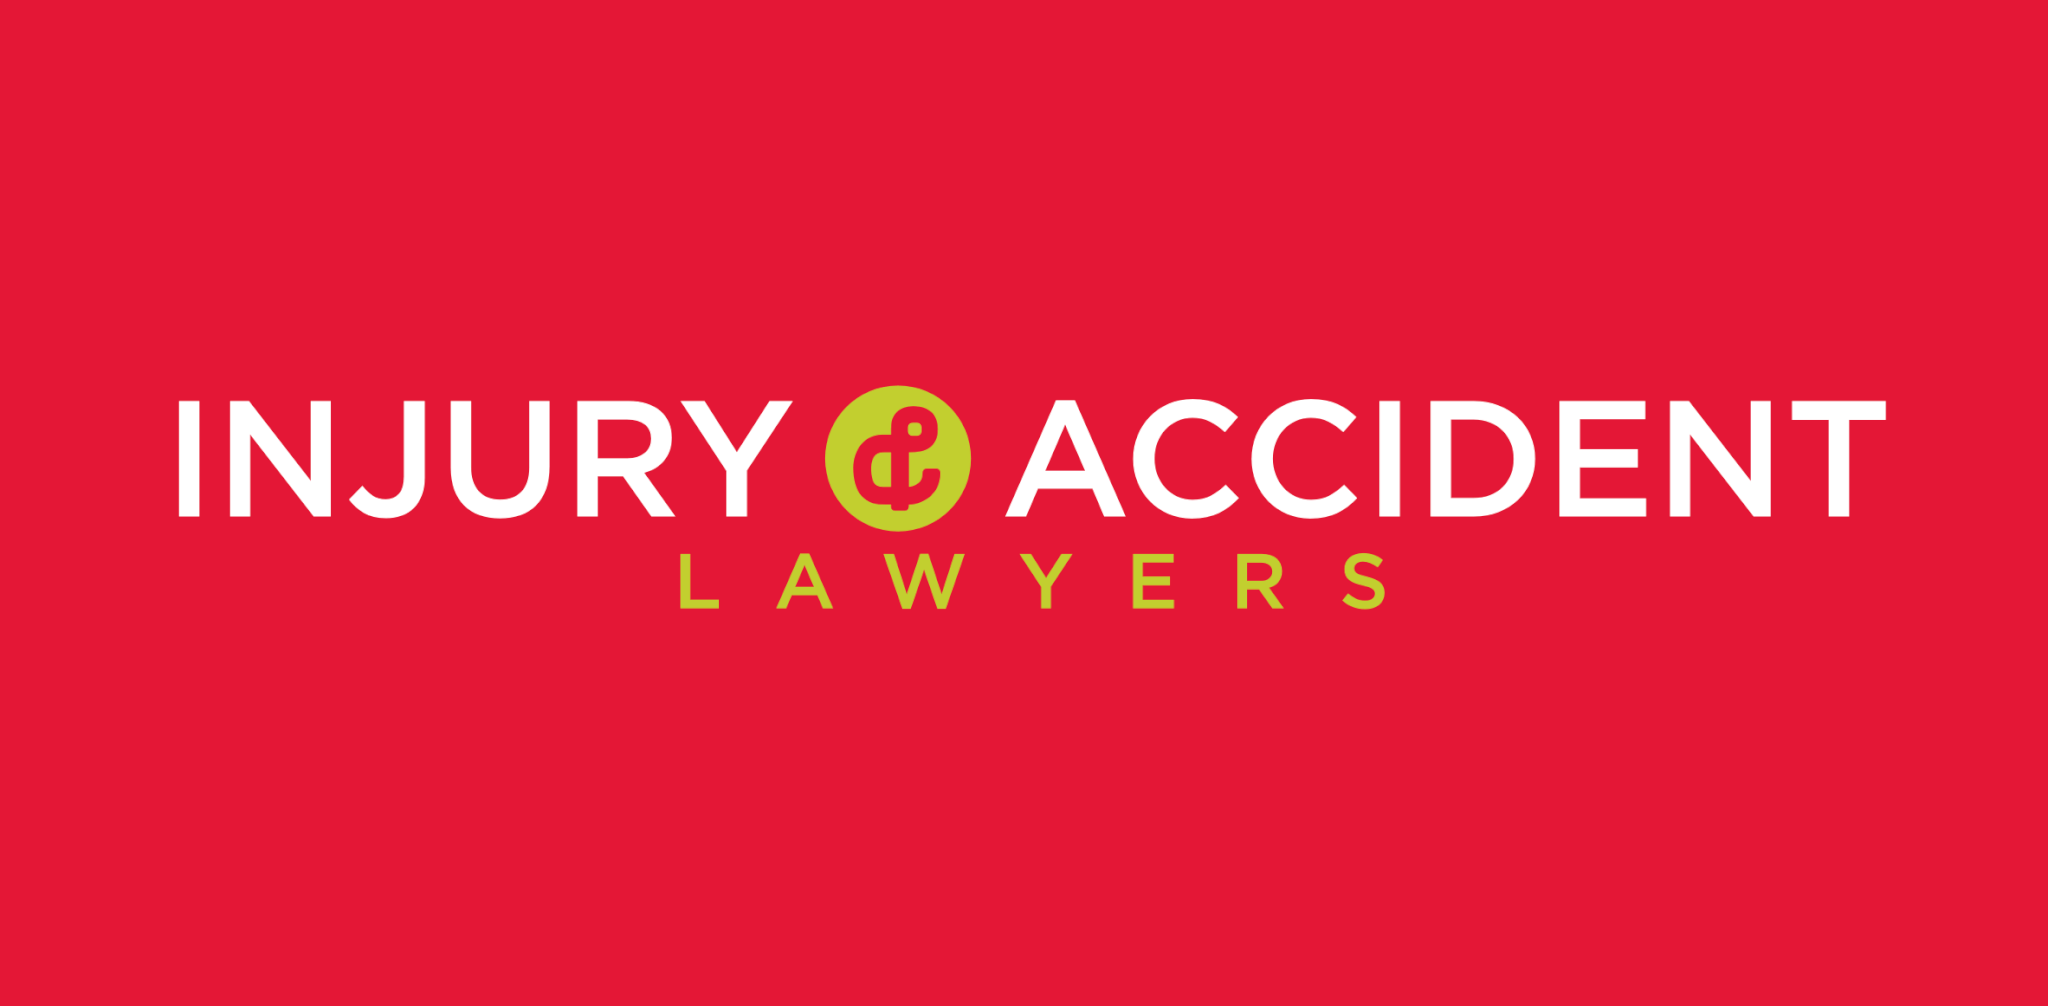 Injury & Accident Lawyers